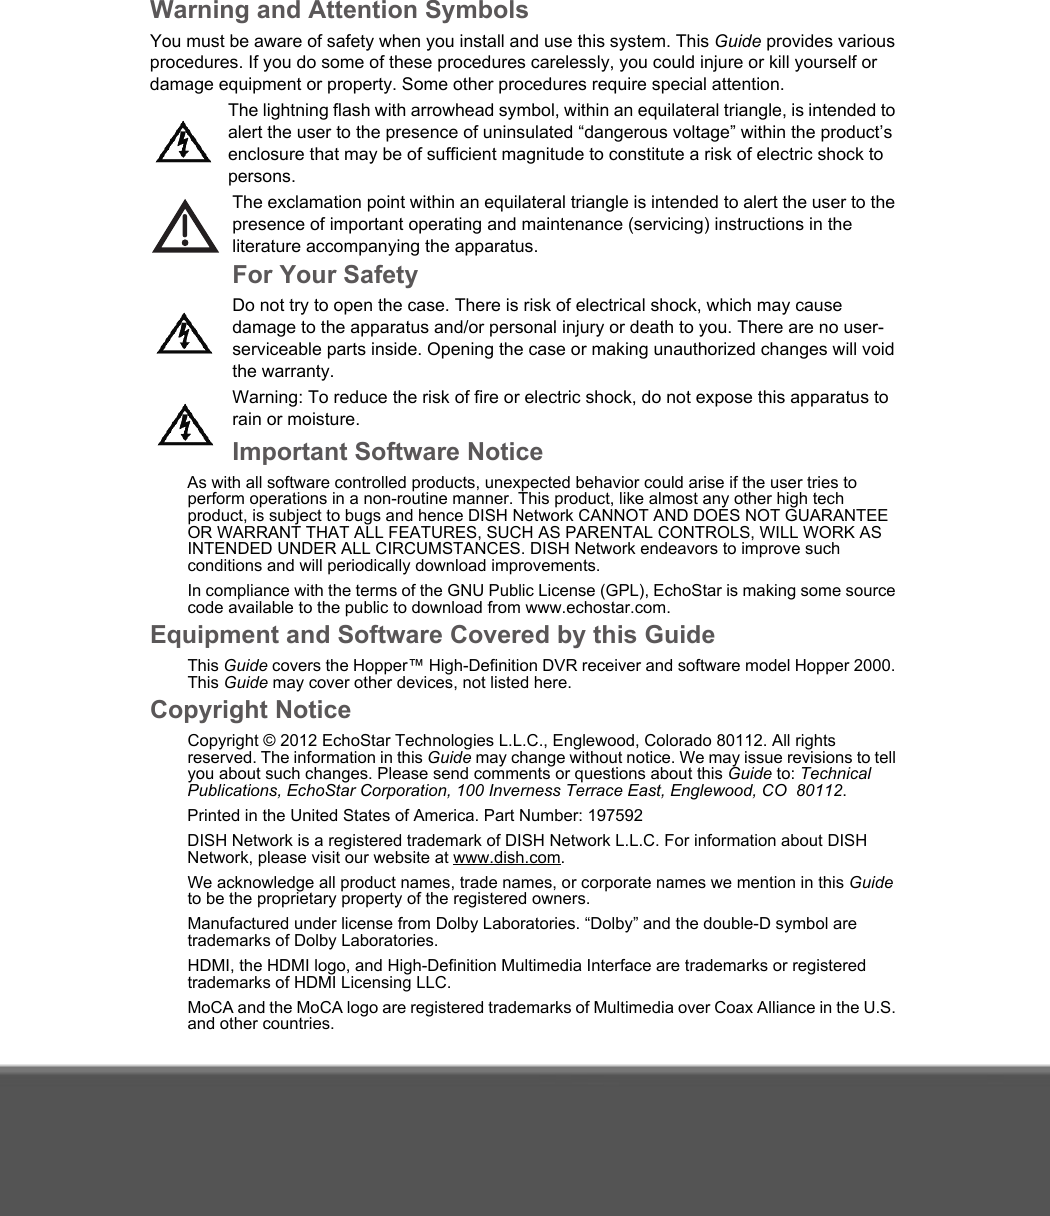 Warning and Attention SymbolsYou must be aware of safety when you install and use this system. This Guide provides various procedures. If you do some of these procedures carelessly, you could injure or kill yourself or damage equipment or property. Some other procedures require special attention.The lightning flash with arrowhead symbol, within an equilateral triangle, is intended to alert the user to the presence of uninsulated “dangerous voltage” within the product’s enclosure that may be of sufficient magnitude to constitute a risk of electric shock to persons.The exclamation point within an equilateral triangle is intended to alert the user to the presence of important operating and maintenance (servicing) instructions in the literature accompanying the apparatus.For Your SafetyDo not try to open the case. There is risk of electrical shock, which may cause damage to the apparatus and/or personal injury or death to you. There are no user-serviceable parts inside. Opening the case or making unauthorized changes will void the warranty.Warning: To reduce the risk of fire or electric shock, do not expose this apparatus to rain or moisture. Important Software NoticeAs with all software controlled products, unexpected behavior could arise if the user tries to perform operations in a non-routine manner. This product, like almost any other high tech product, is subject to bugs and hence DISH Network CANNOT AND DOES NOT GUARANTEE OR WARRANT THAT ALL FEATURES, SUCH AS PARENTAL CONTROLS, WILL WORK AS INTENDED UNDER ALL CIRCUMSTANCES. DISH Network endeavors to improve such conditions and will periodically download improvements. In compliance with the terms of the GNU Public License (GPL), EchoStar is making some source code available to the public to download from www.echostar.com.Equipment and Software Covered by this GuideThis Guide covers the Hopper™ High-Definition DVR receiver and software model Hopper 2000. This Guide may cover other devices, not listed here. Copyright NoticeCopyright © 2012 EchoStar Technologies L.L.C., Englewood, Colorado 80112. All rights reserved. The information in this Guide may change without notice. We may issue revisions to tell you about such changes. Please send comments or questions about this Guide to: Technical Publications, EchoStar Corporation, 100 Inverness Terrace East, Englewood, CO  80112. Printed in the United States of America. Part Number: 197592DISH Network is a registered trademark of DISH Network L.L.C. For information about DISH Network, please visit our website at www.dish.com. We acknowledge all product names, trade names, or corporate names we mention in this Guide to be the proprietary property of the registered owners.Manufactured under license from Dolby Laboratories. “Dolby” and the double-D symbol are trademarks of Dolby Laboratories.HDMI, the HDMI logo, and High-Definition Multimedia Interface are trademarks or registered trademarks of HDMI Licensing LLC.MoCA and the MoCA logo are registered trademarks of Multimedia over Coax Alliance in the U.S. and other countries. 